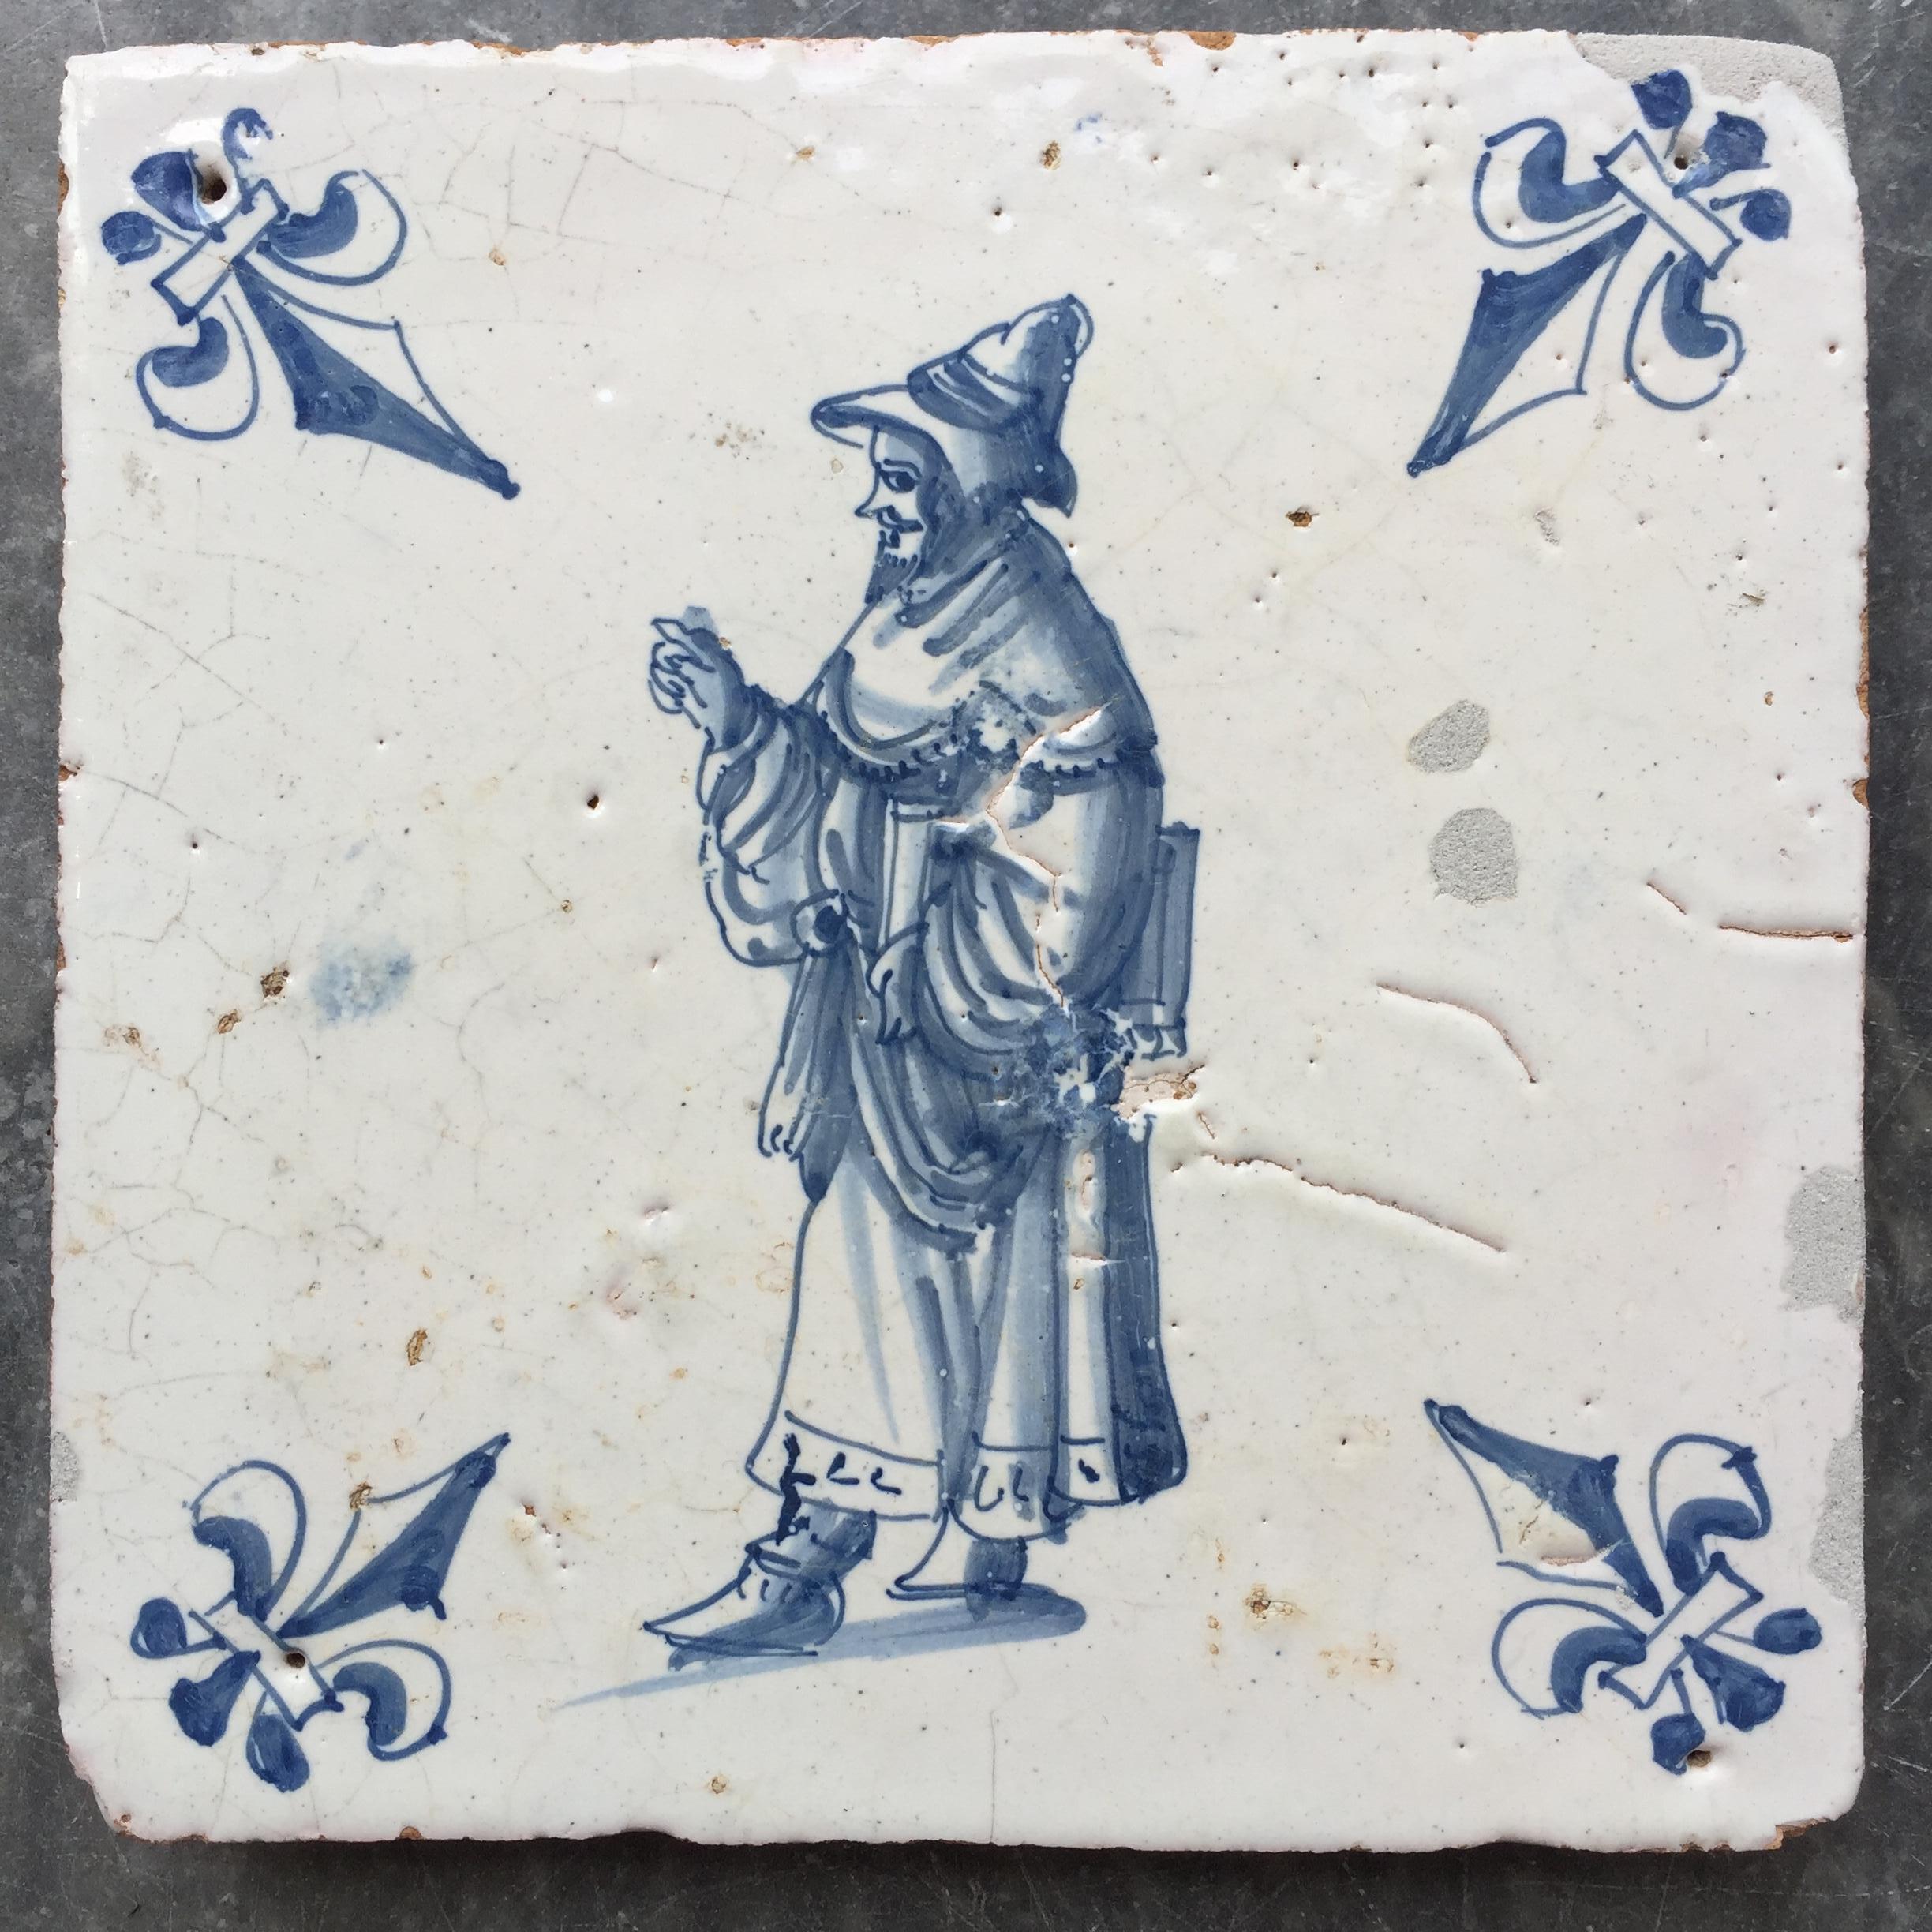 Exceptional Set of 20 Blue and White Dutch Delft Tiles with Figures 11